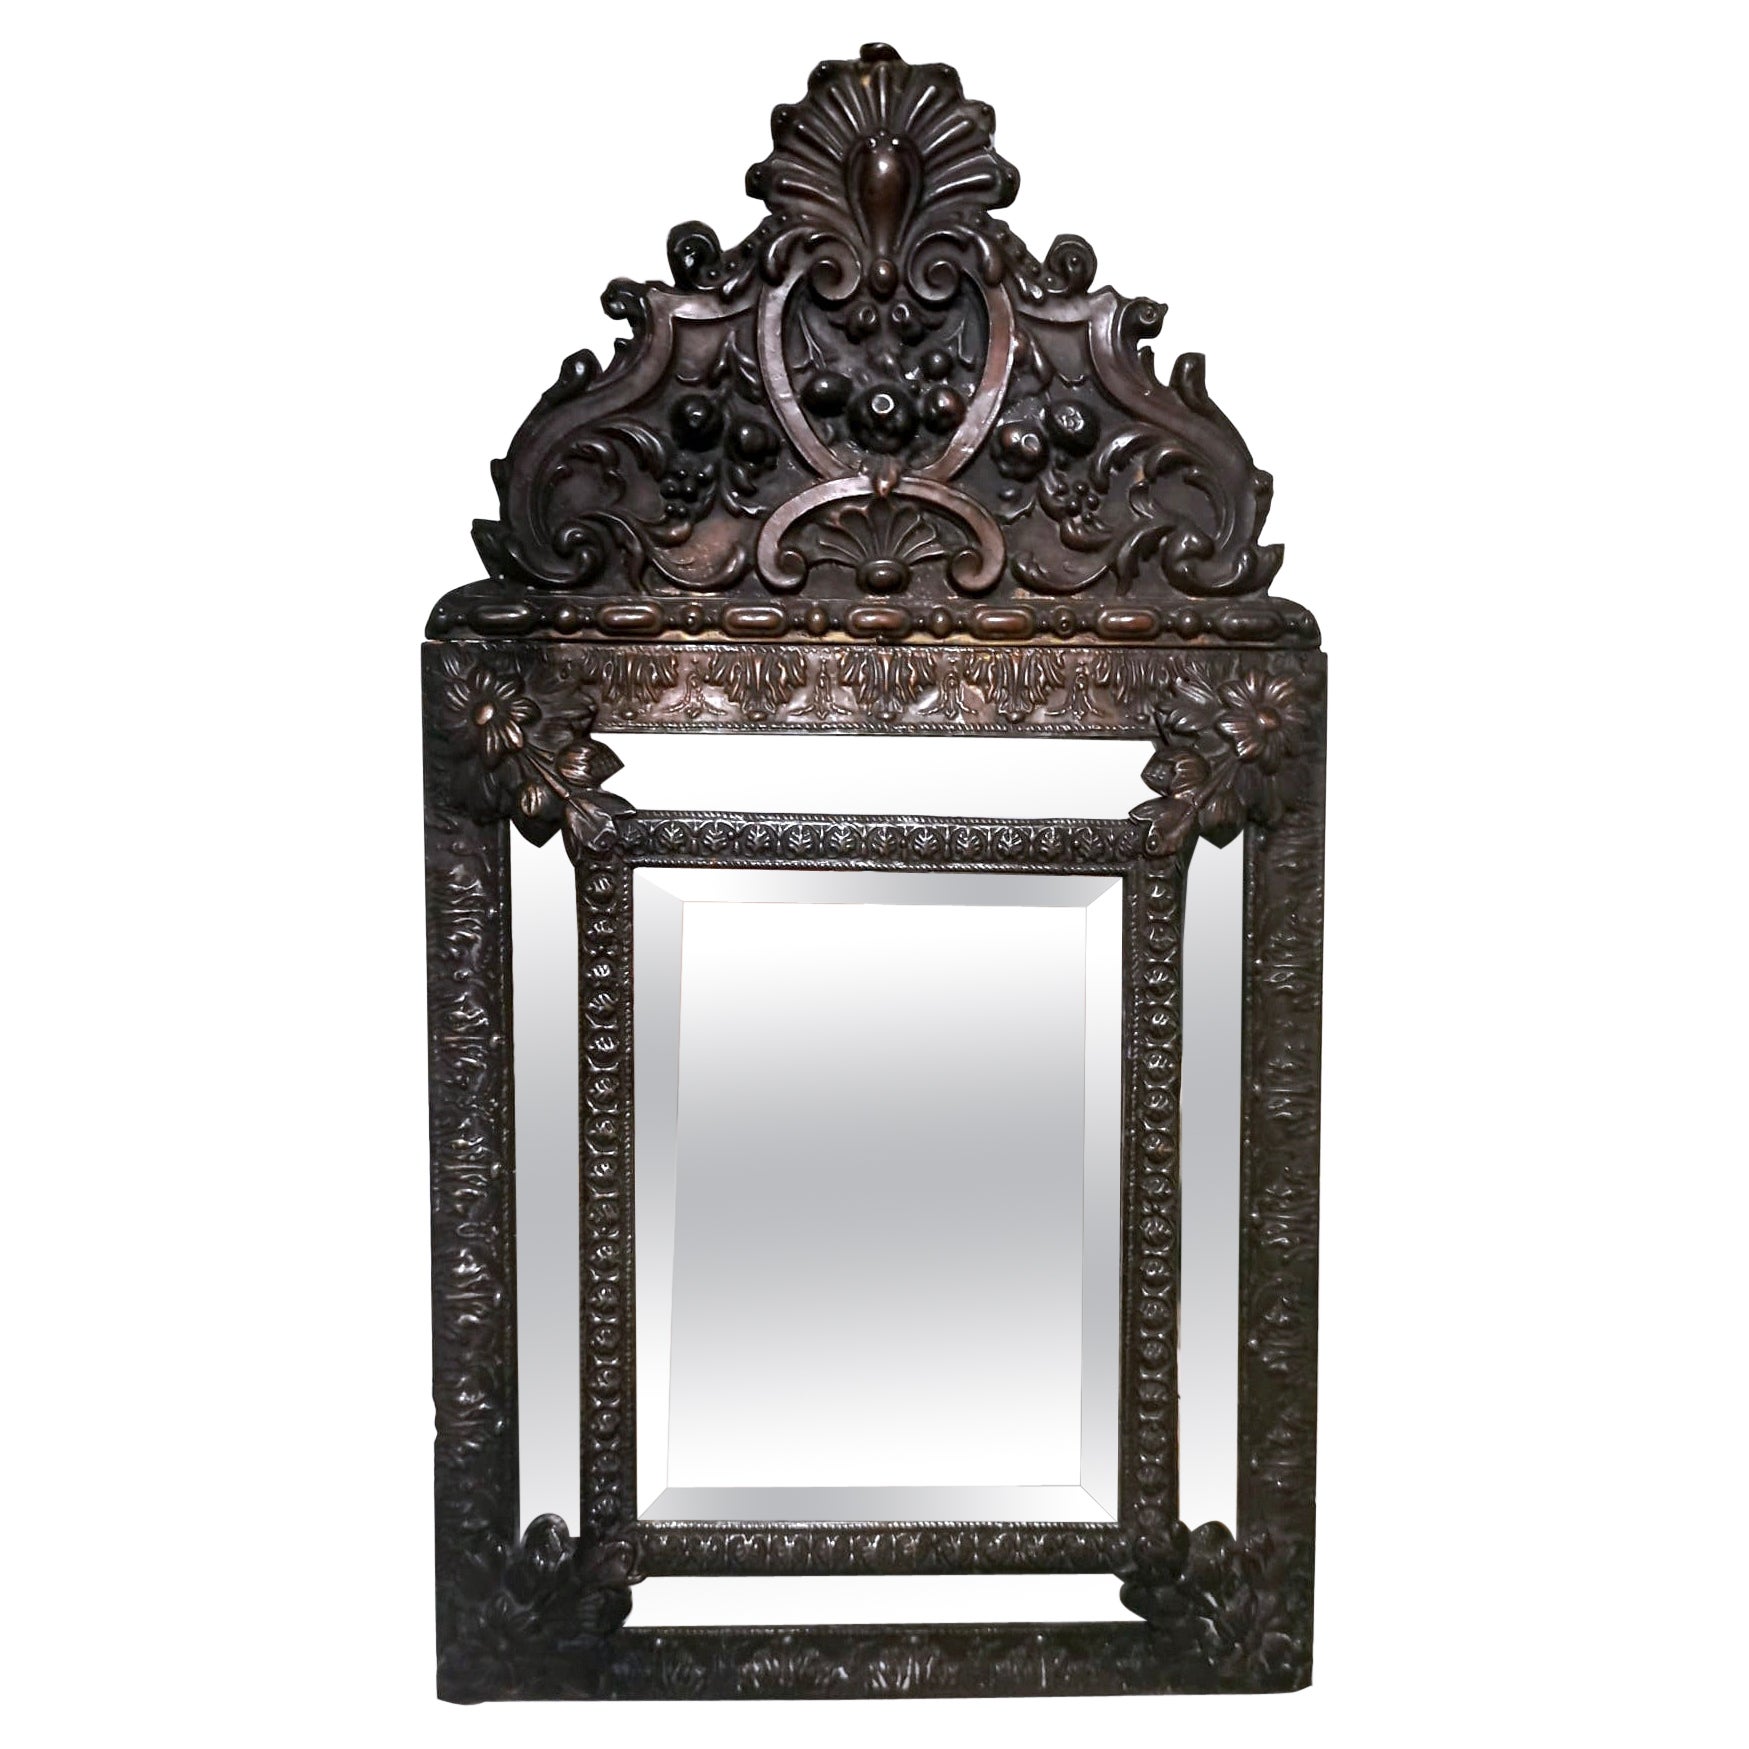 Napoleon III Style Wall Mirror In Burnished Brass "Repoussé" Workmanship For Sale